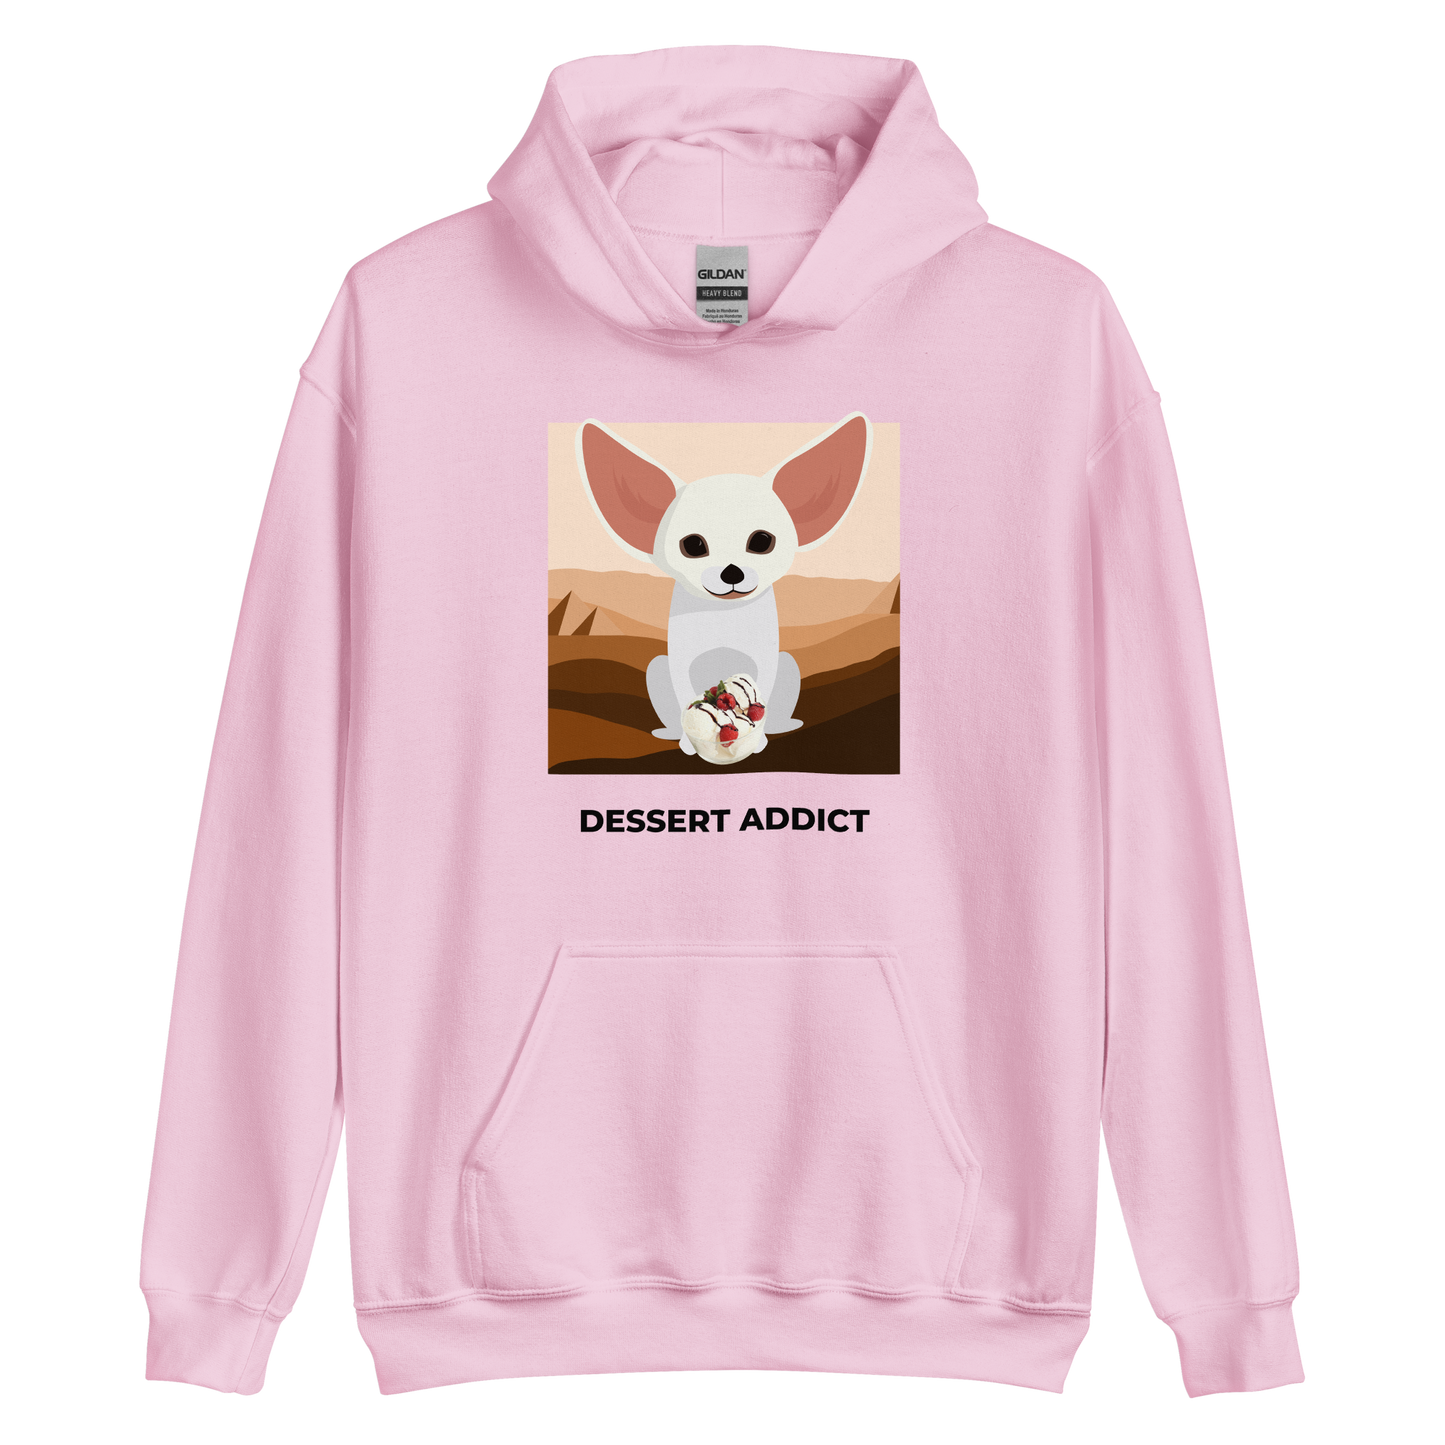 Light Pink Fennec Fox Hoodie featuring an adorable Dessert Addict graphic on the chest - Funny Graphic Fennec Fox Hoodies - Boozy Fox